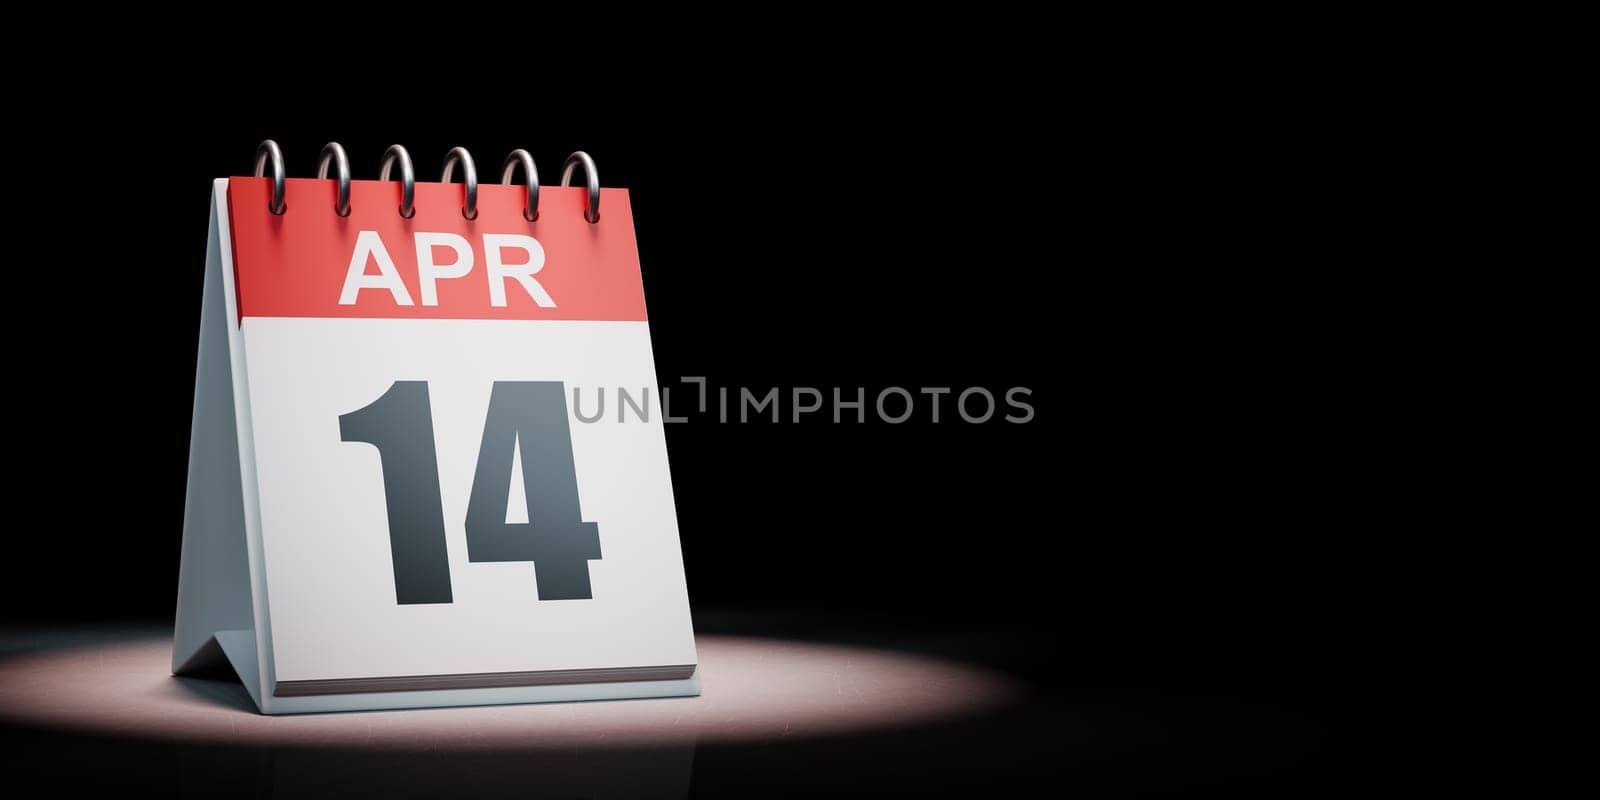 Red and White April 14 Desk Calendar Spotlighted on Black Background with Copy Space 3D Illustration